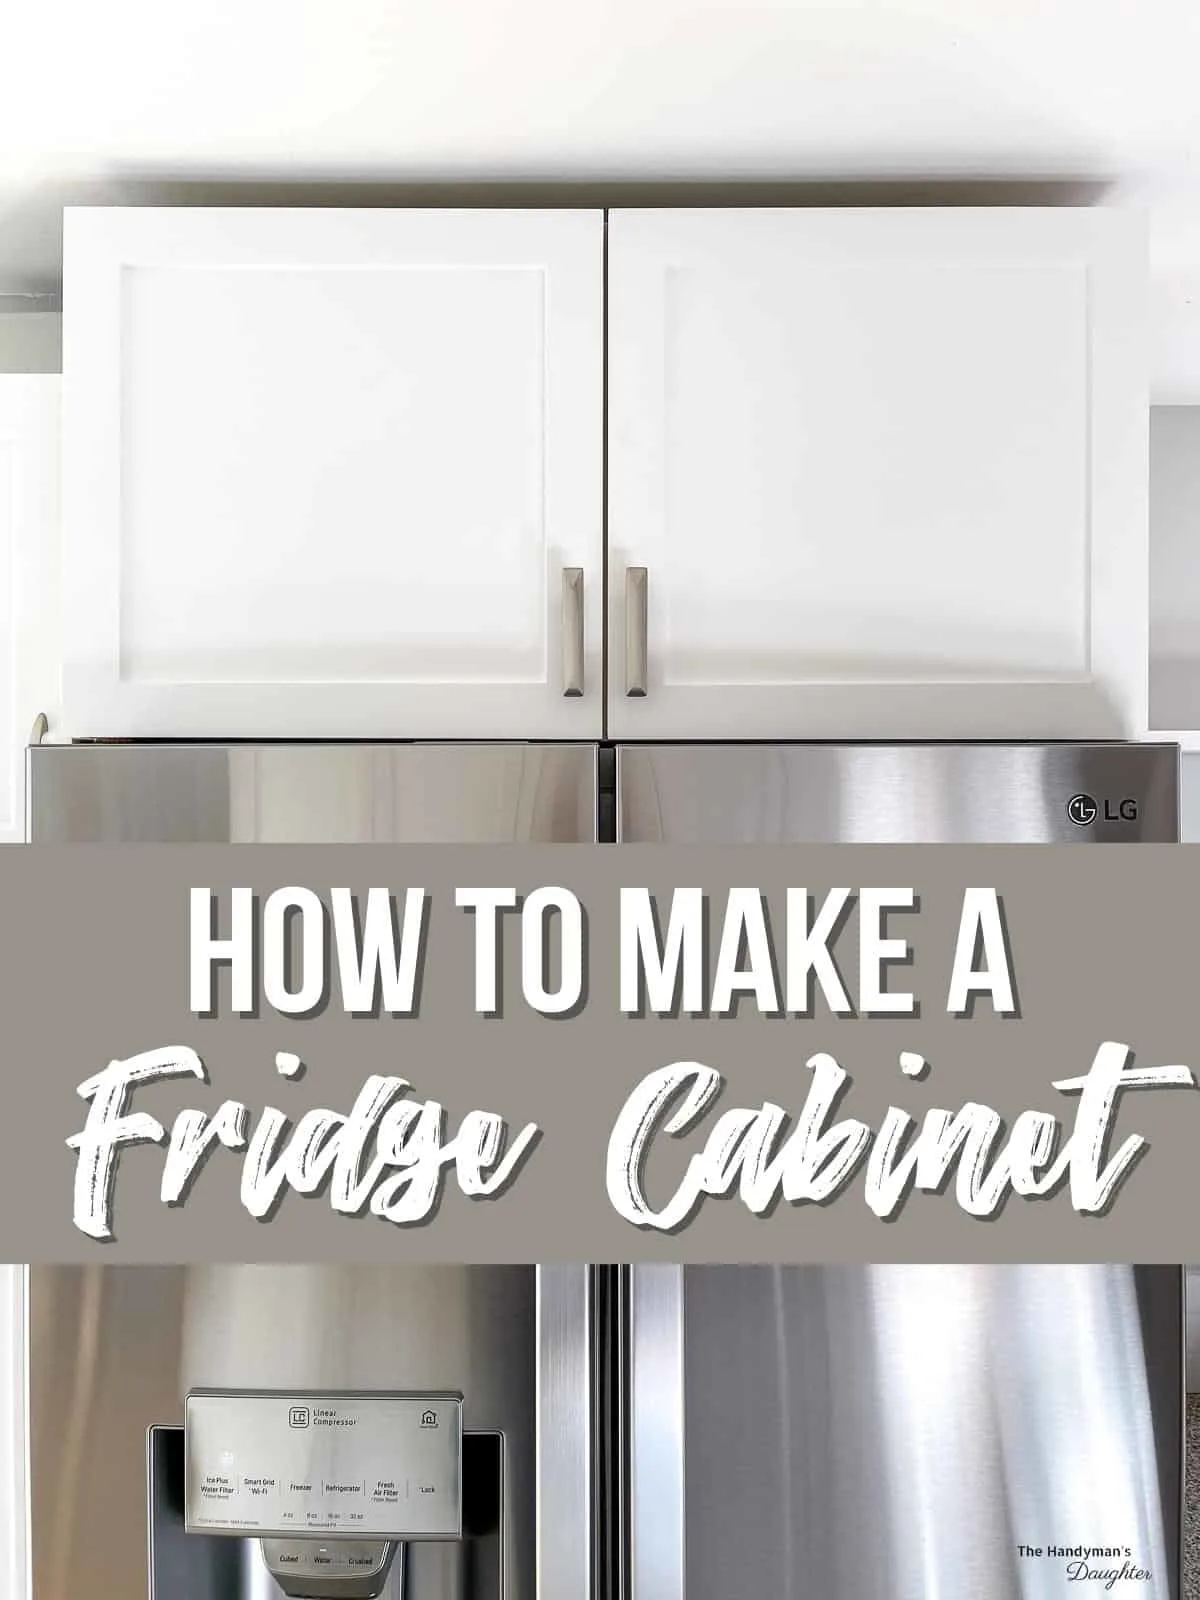 https://www.thehandymansdaughter.com/wp-content/uploads/2023/02/How-to-make-a-fridge-cabinet-Pin-1.jpeg.webp